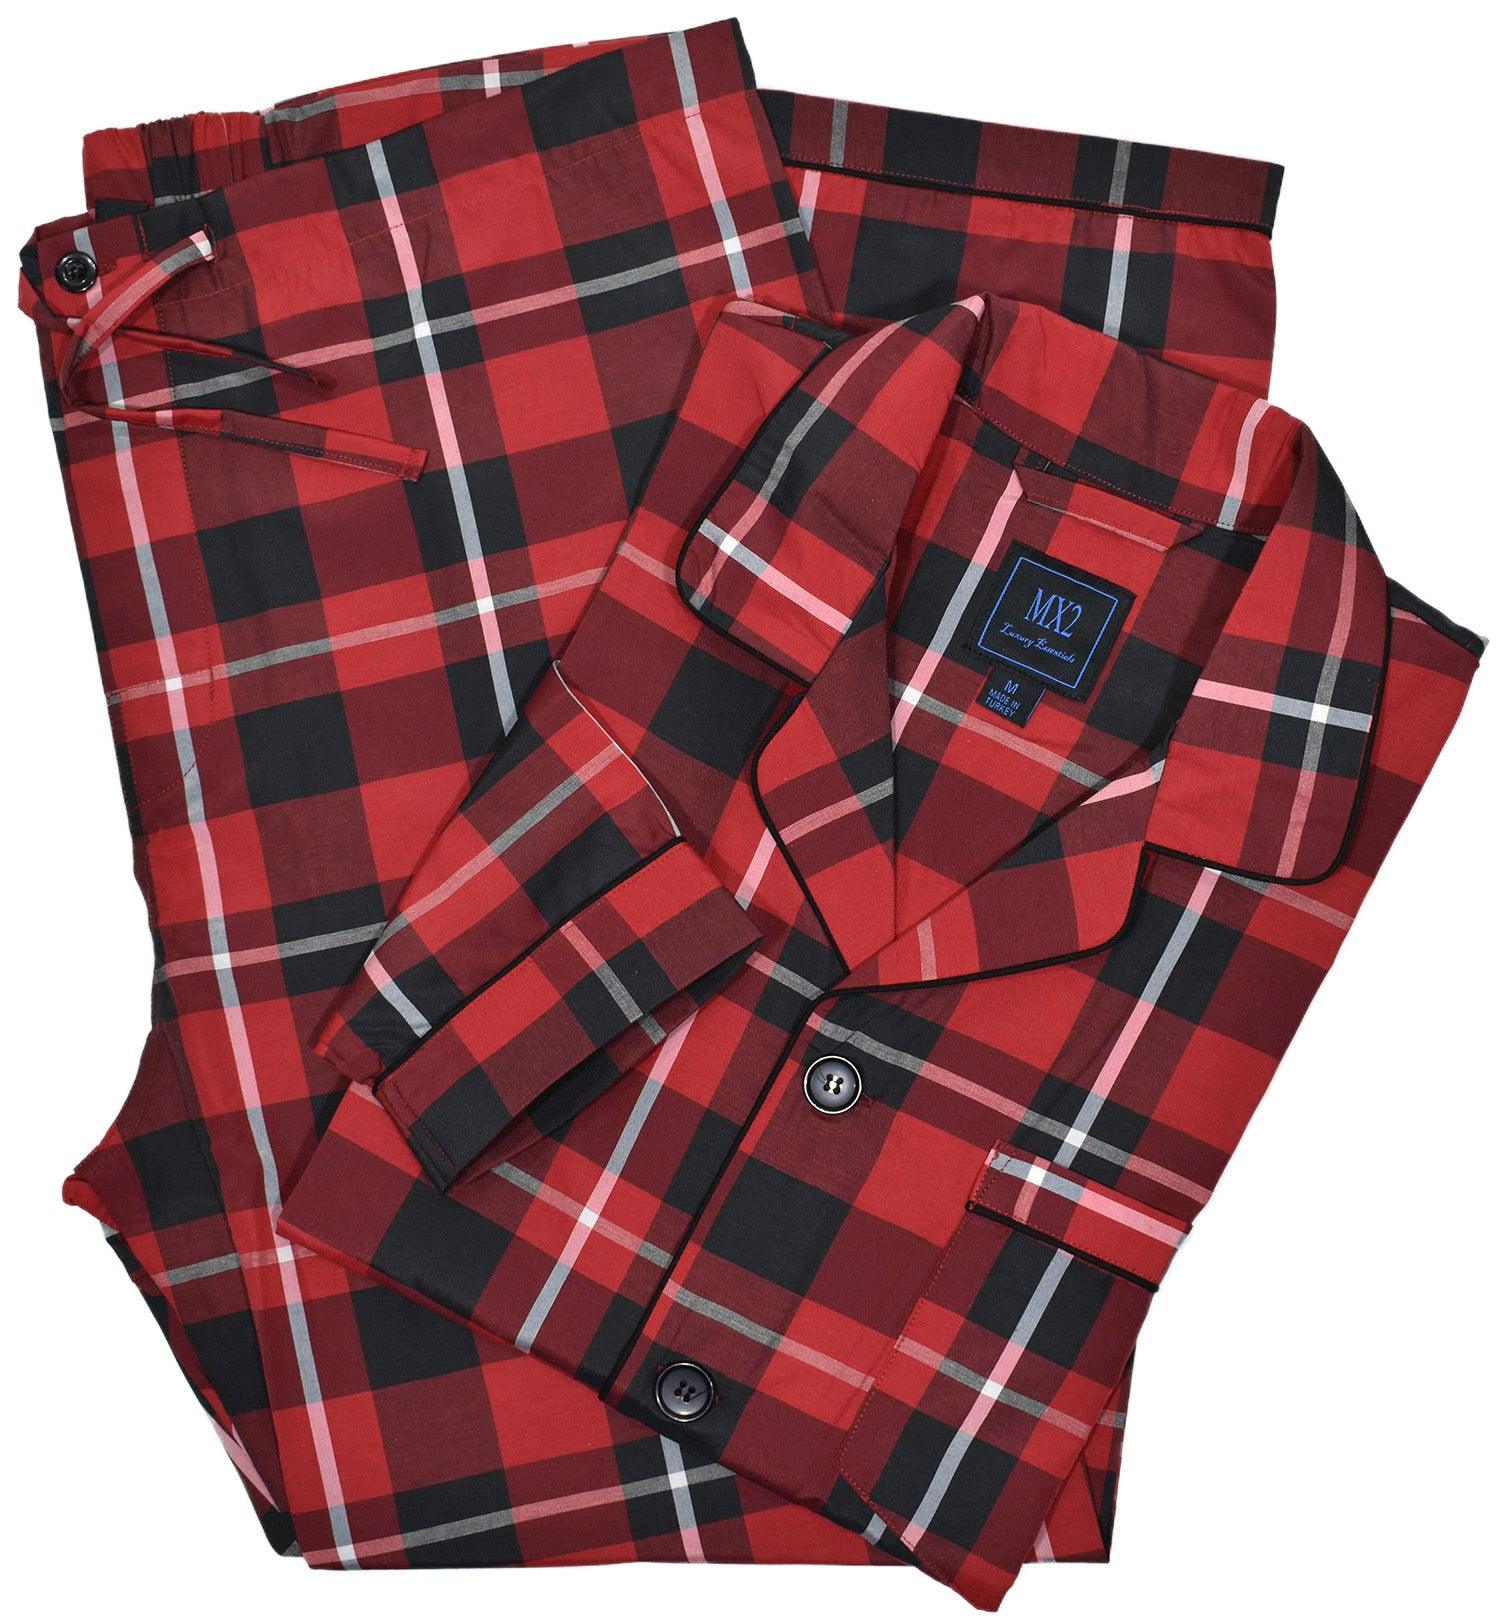 Soft cotton woven fabric. Traditional fashion pattern. Red with black plaid pattern. Classic coat top with pocket, button closure and edge piping. Classic draw string pant with a touch of elastic for comfort. Classic fit.  By Marcello Sport